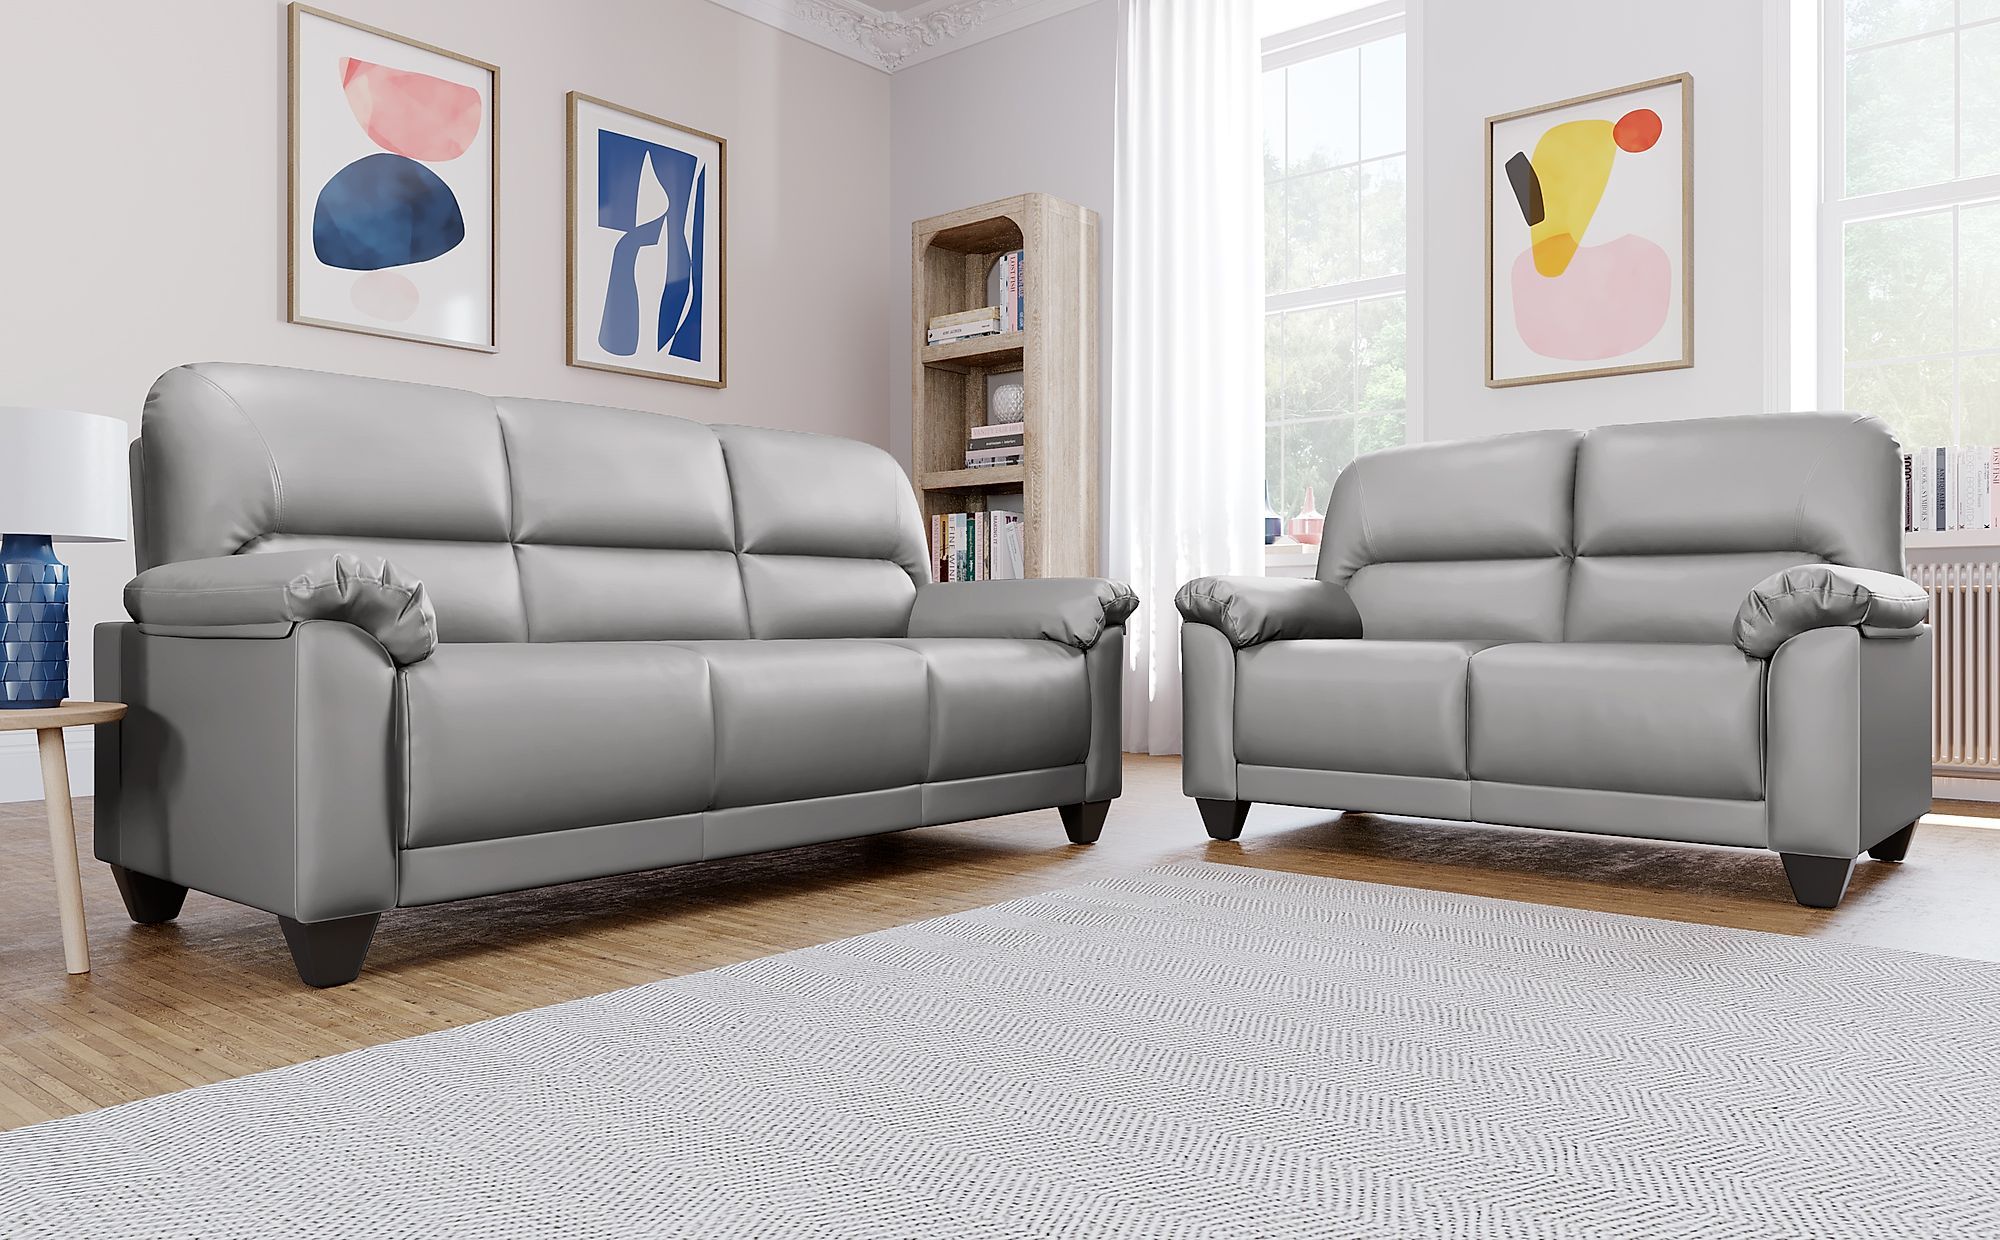 Kenton Small Light Grey Leather 3+2 Seater Sofa Set | Furniture Choice Throughout Sofas In Light Gray (Gallery 22 of 22)